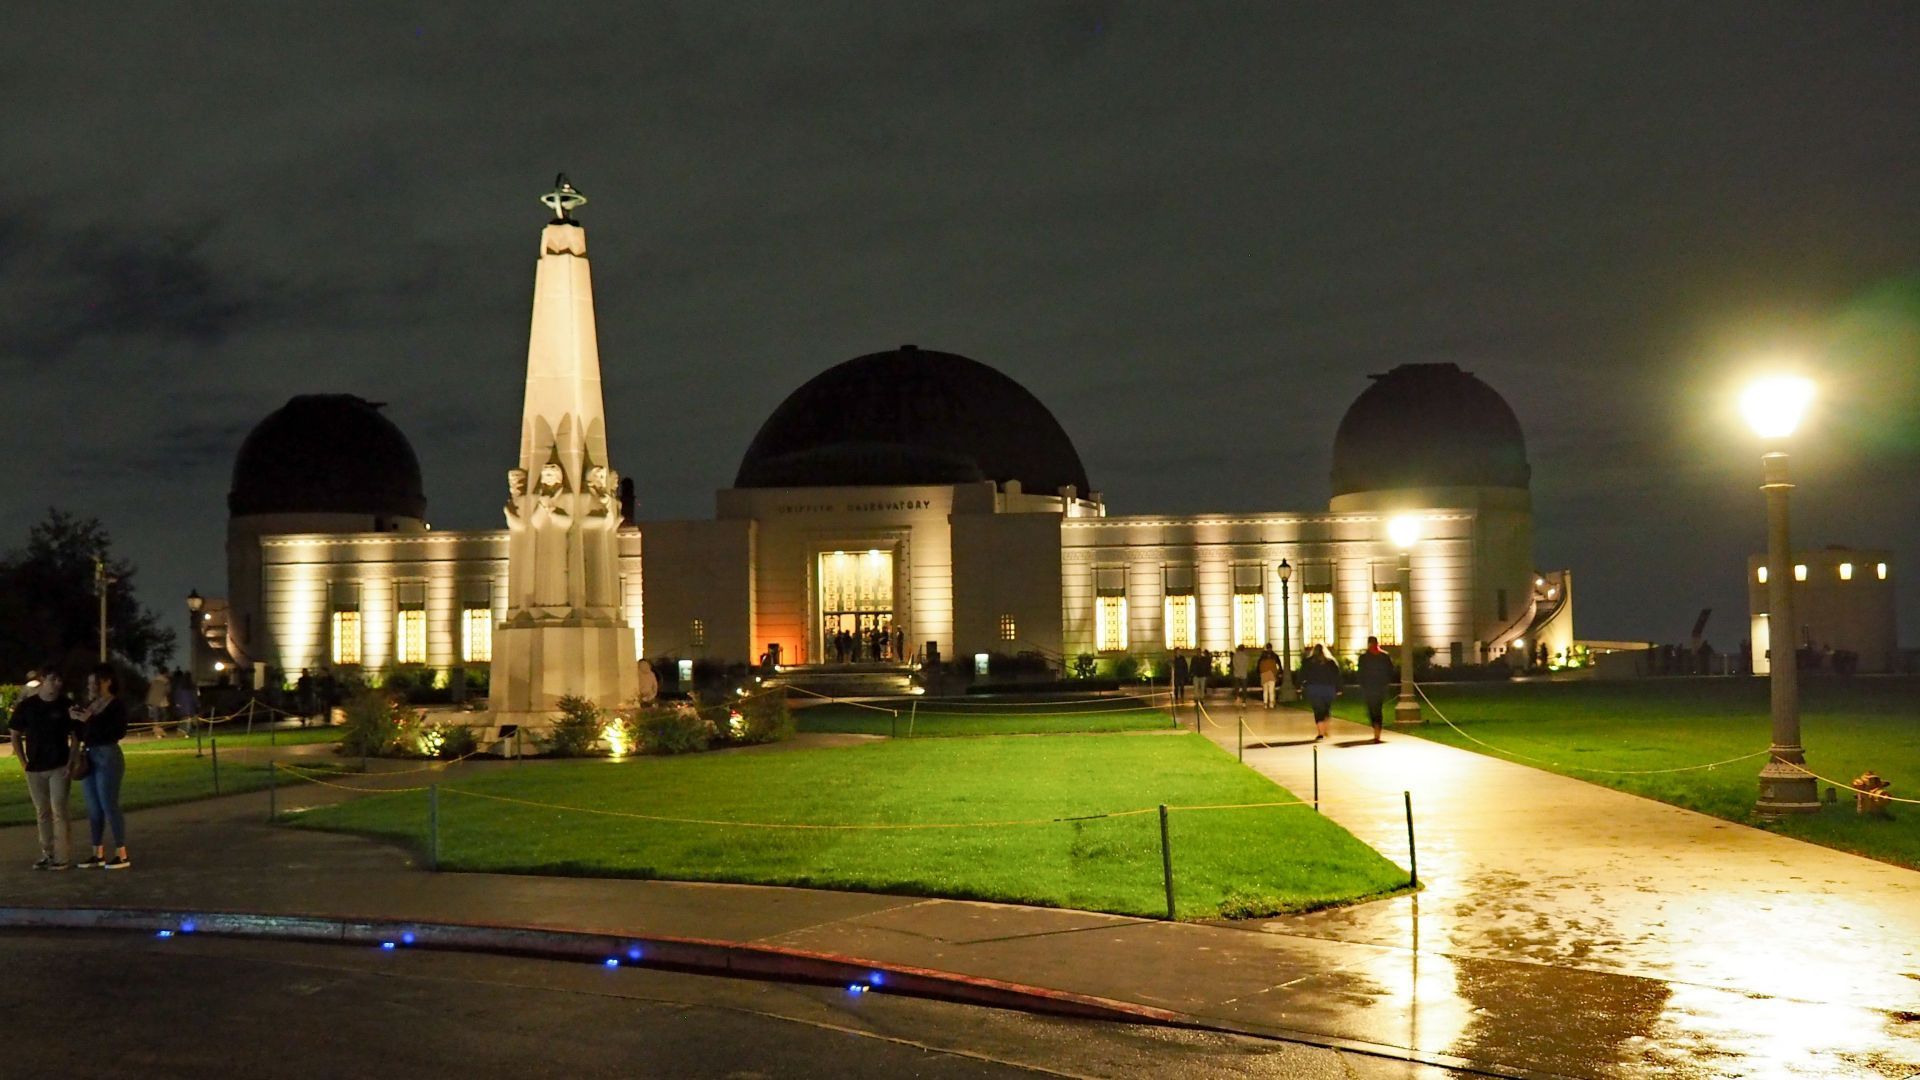 Griffith's Observatory